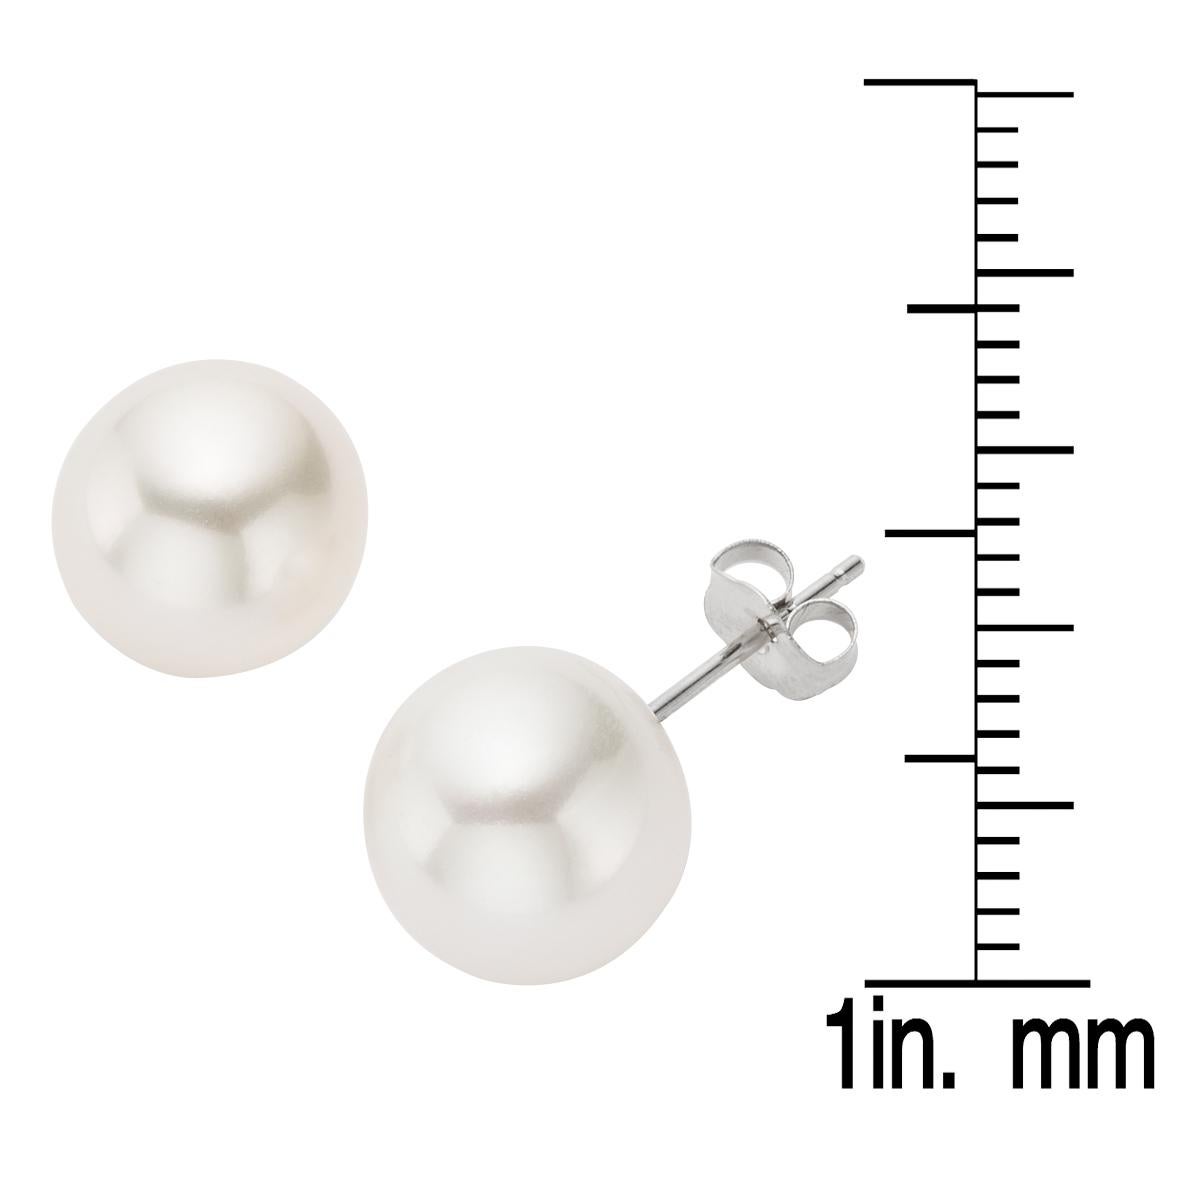 Simplicity and understated elegance have never made such a perfect combination. A beautiful pair of South Sea pearls set on 14K white gold stud backings. The pearl earrings have a 'Very High' grade luster.

Pearl Type: South Sea Cultured
Pearl